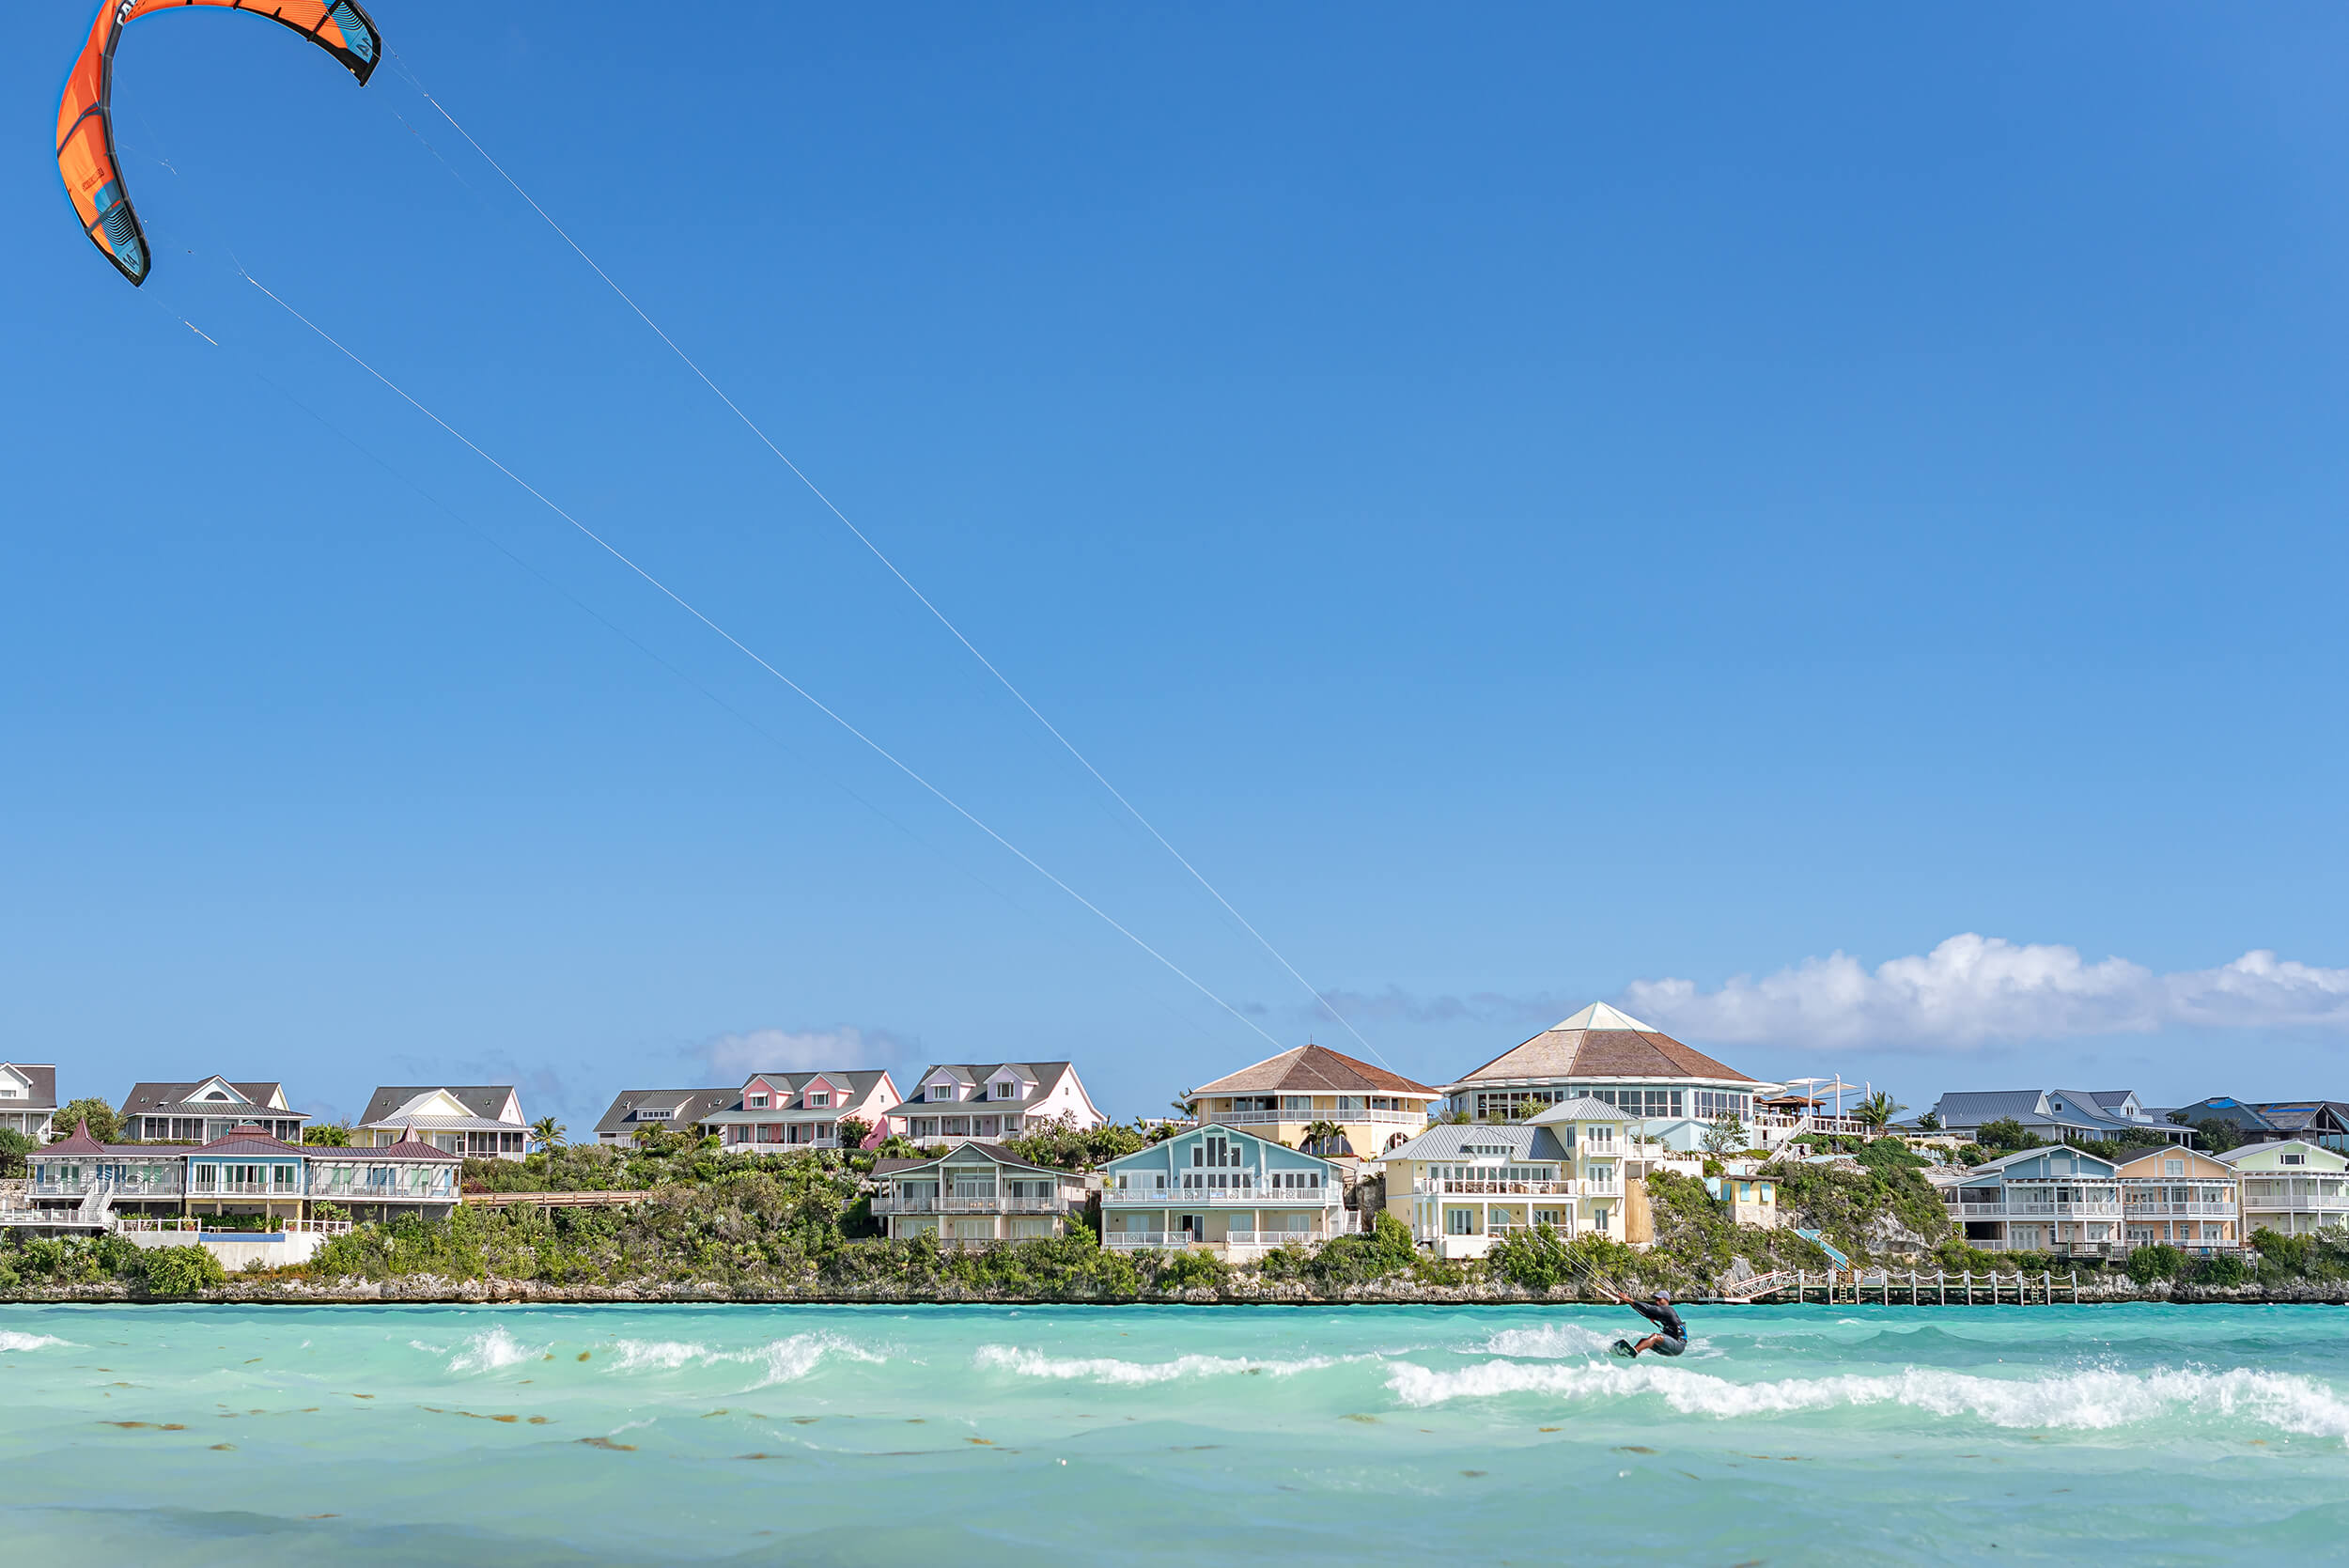 A person kite surfing enjoying exclusive coastal lifestyle at The Abaco Club